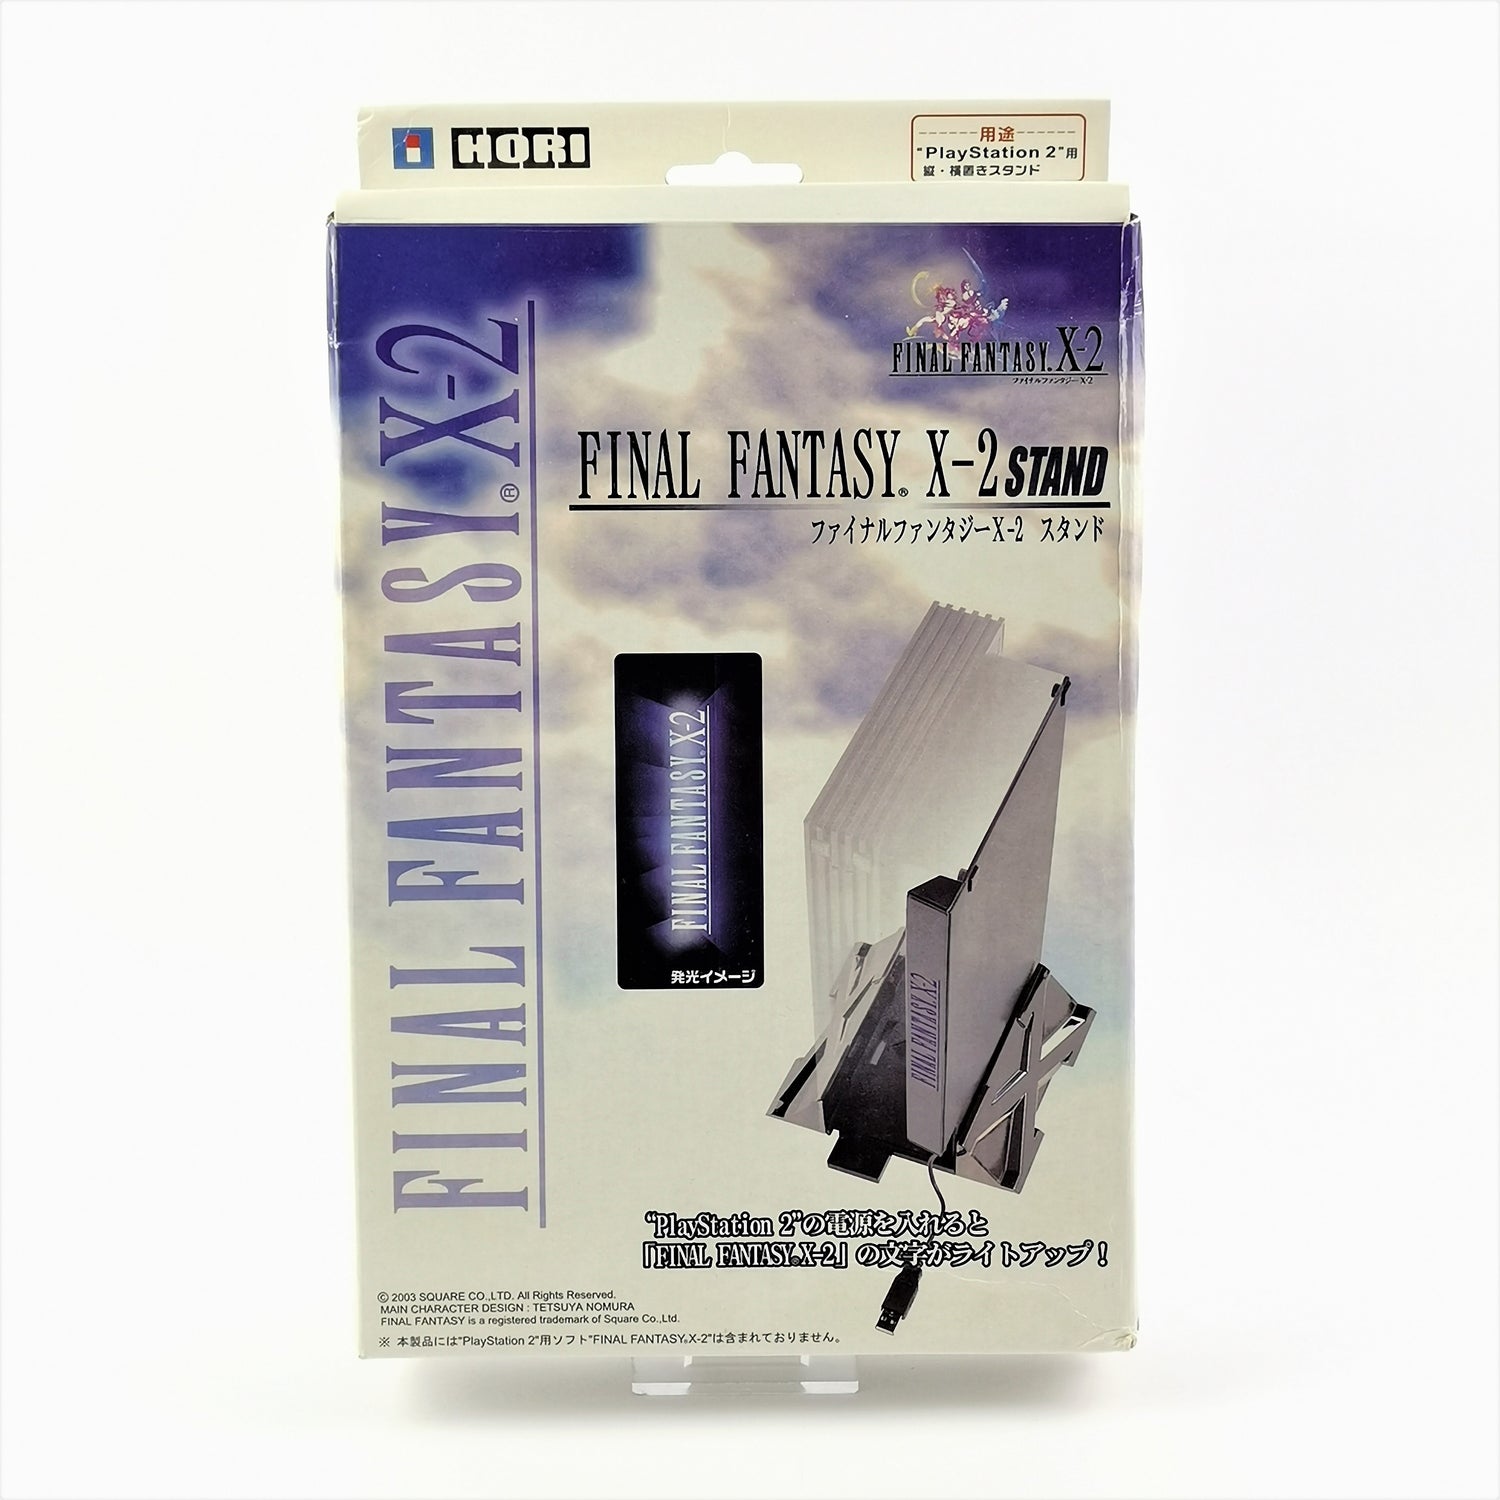 Sony Playstation 2 accessories: Final Fantasy X-2 console stand in original packaging PS2